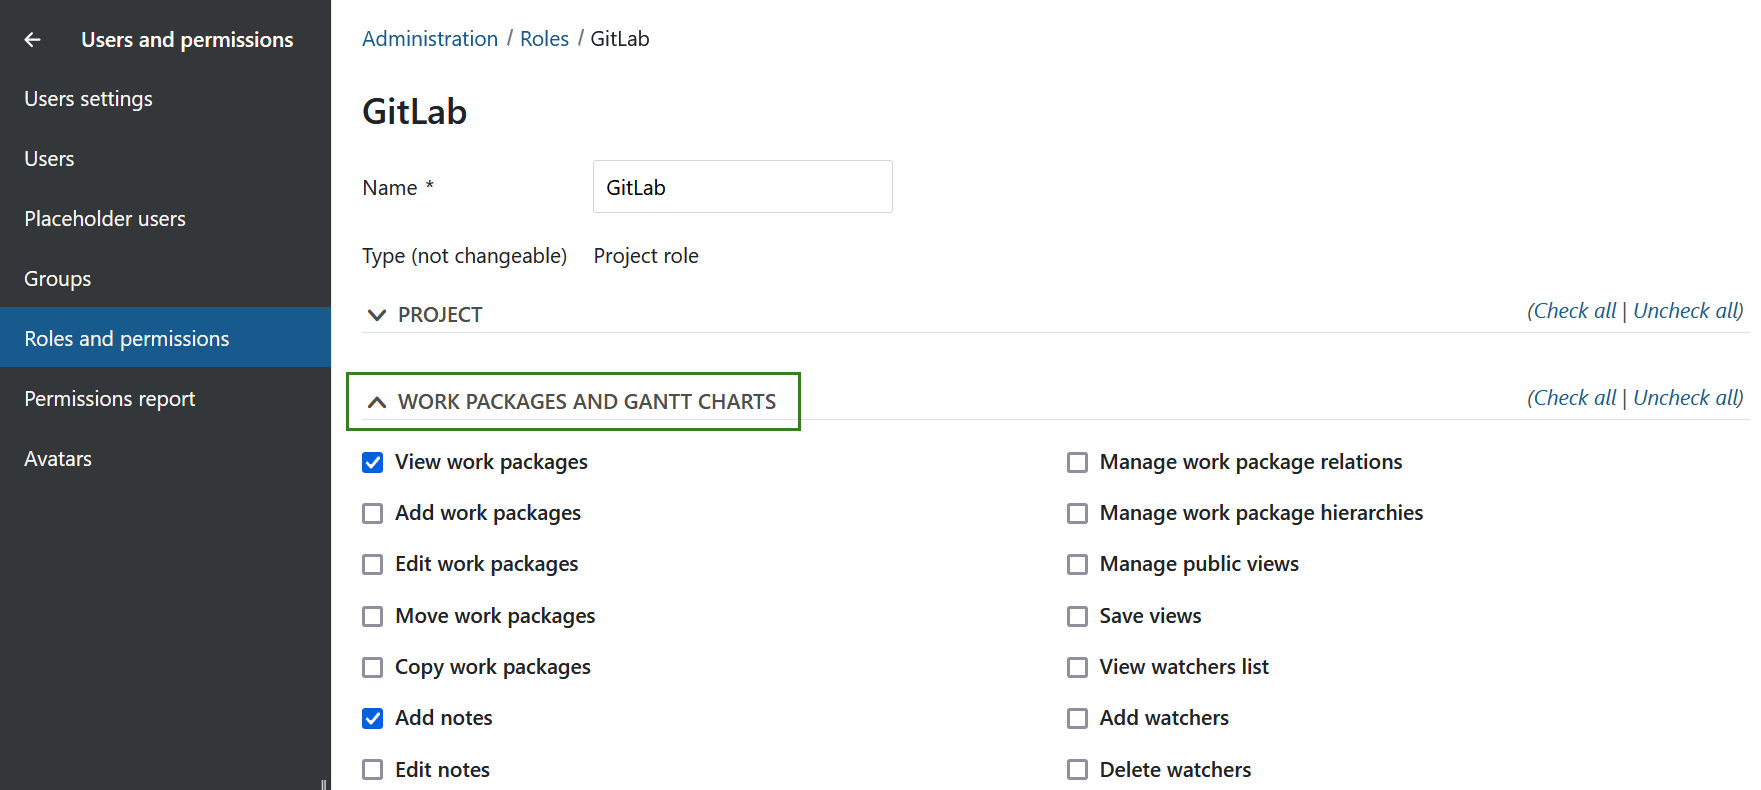 GitLab role with required permissions in OpenProject